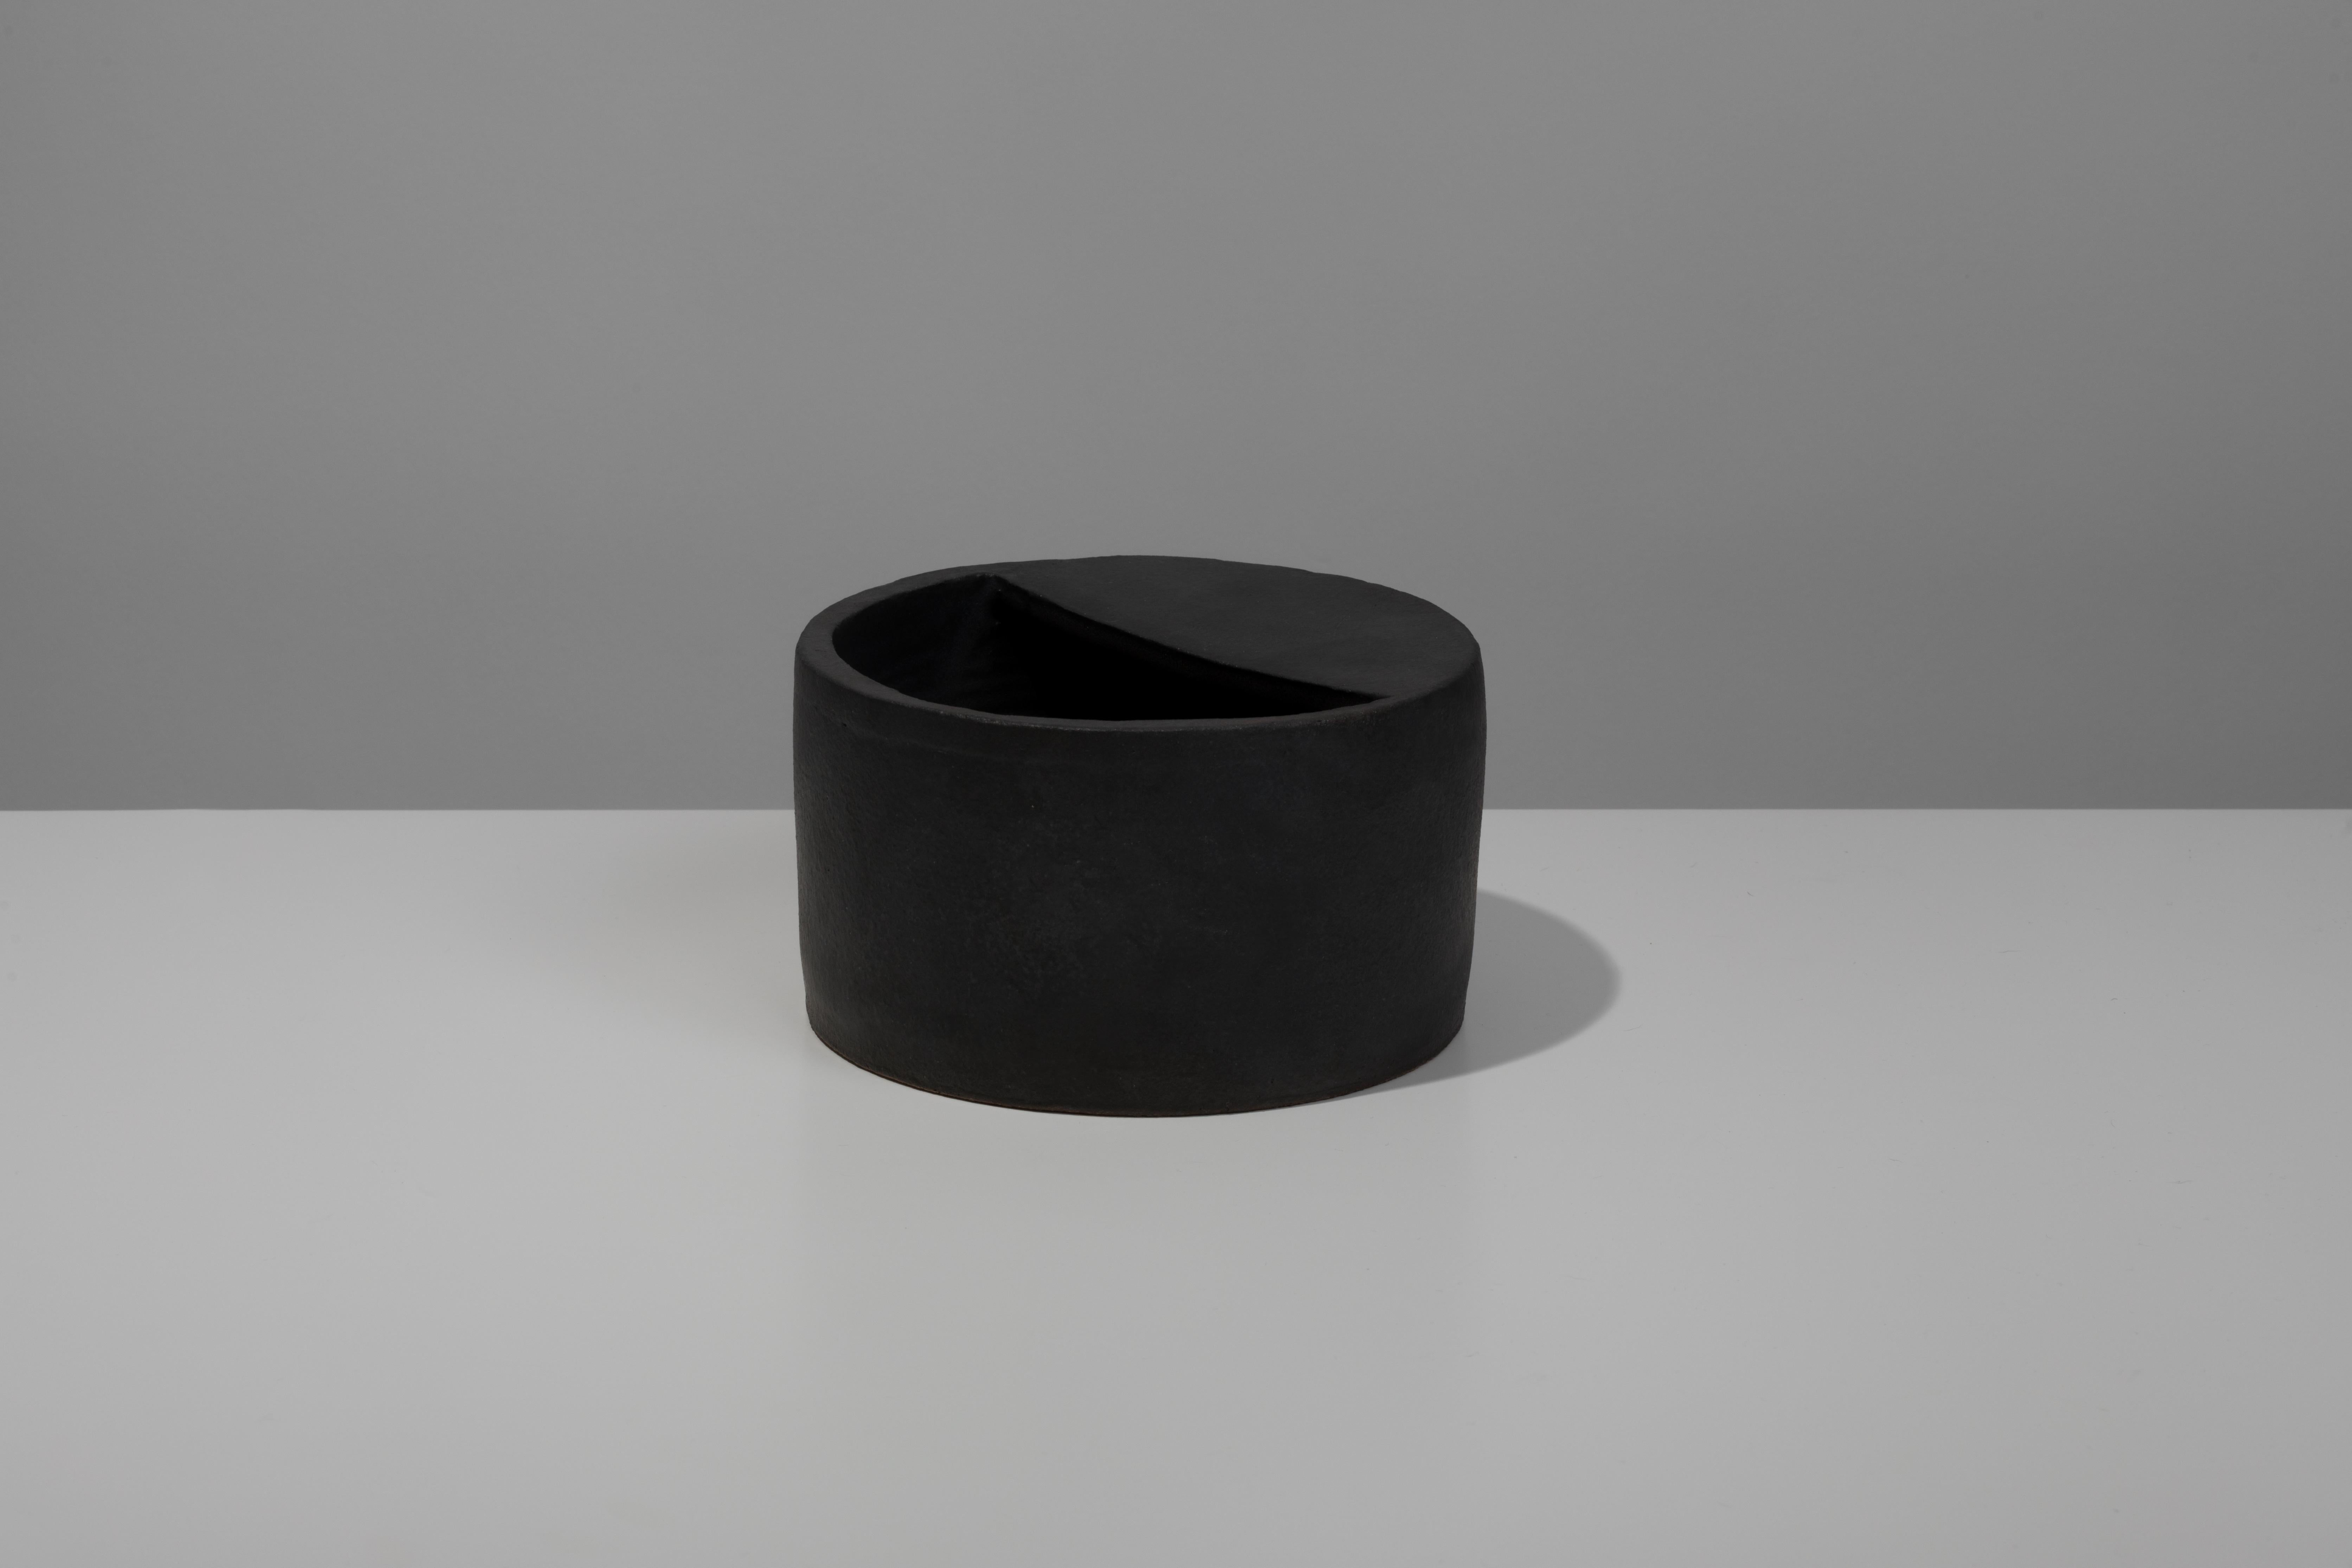 Wheel-thrown and slab-built ceramic vessel with black coppered glaze. Marked with an engraved bronze label to underside: Jonathan Nesci w/ Robert Pulley 18/06. 

Designed by Jonathan Nesci and made in Columbus, Indiana by local ceramist Robert